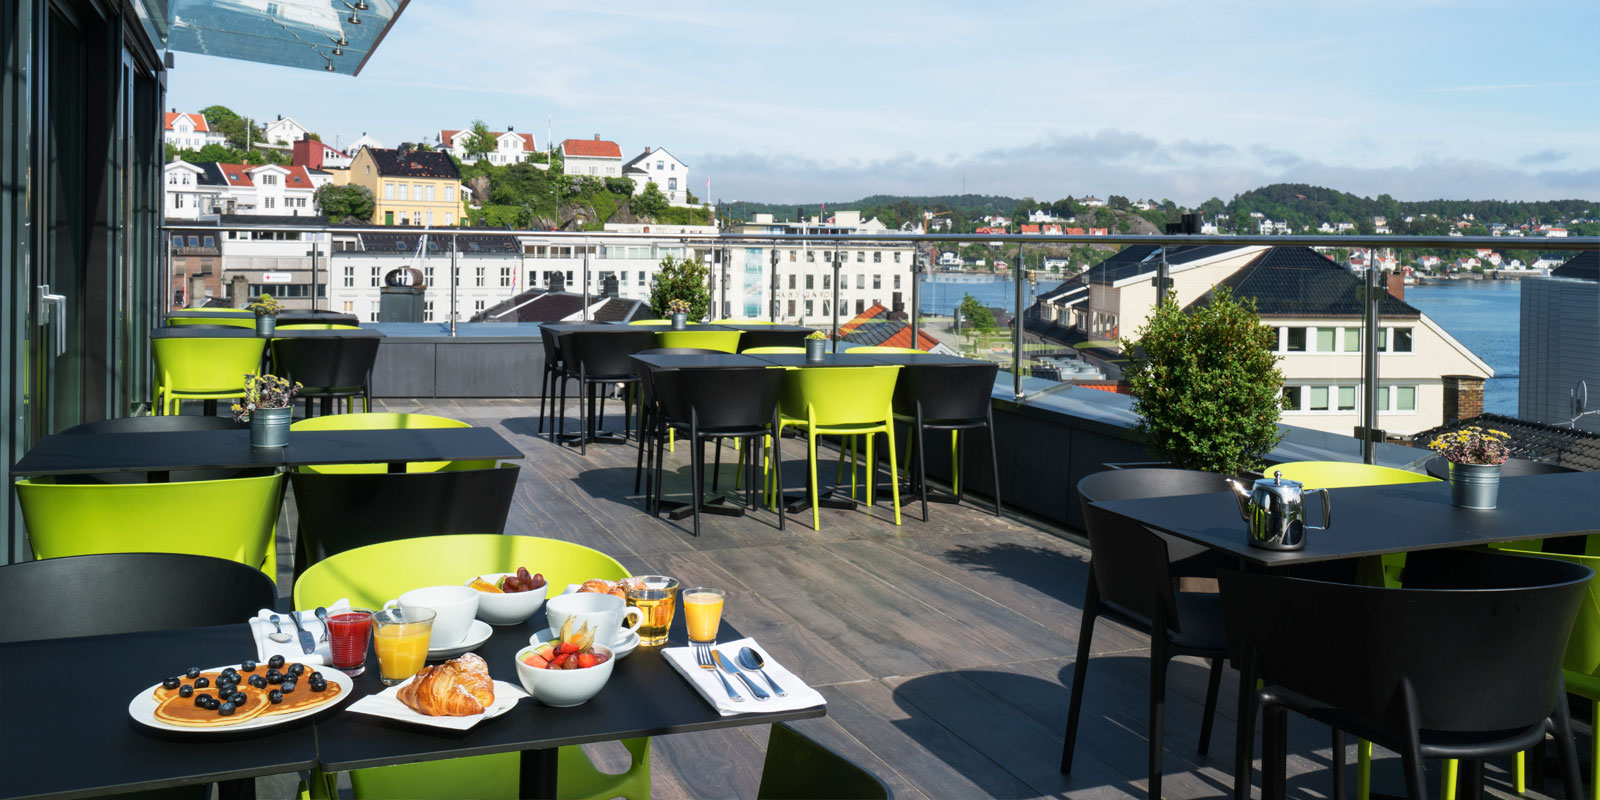 The view from the breakfast terrace at Thon Hotel Arendal.